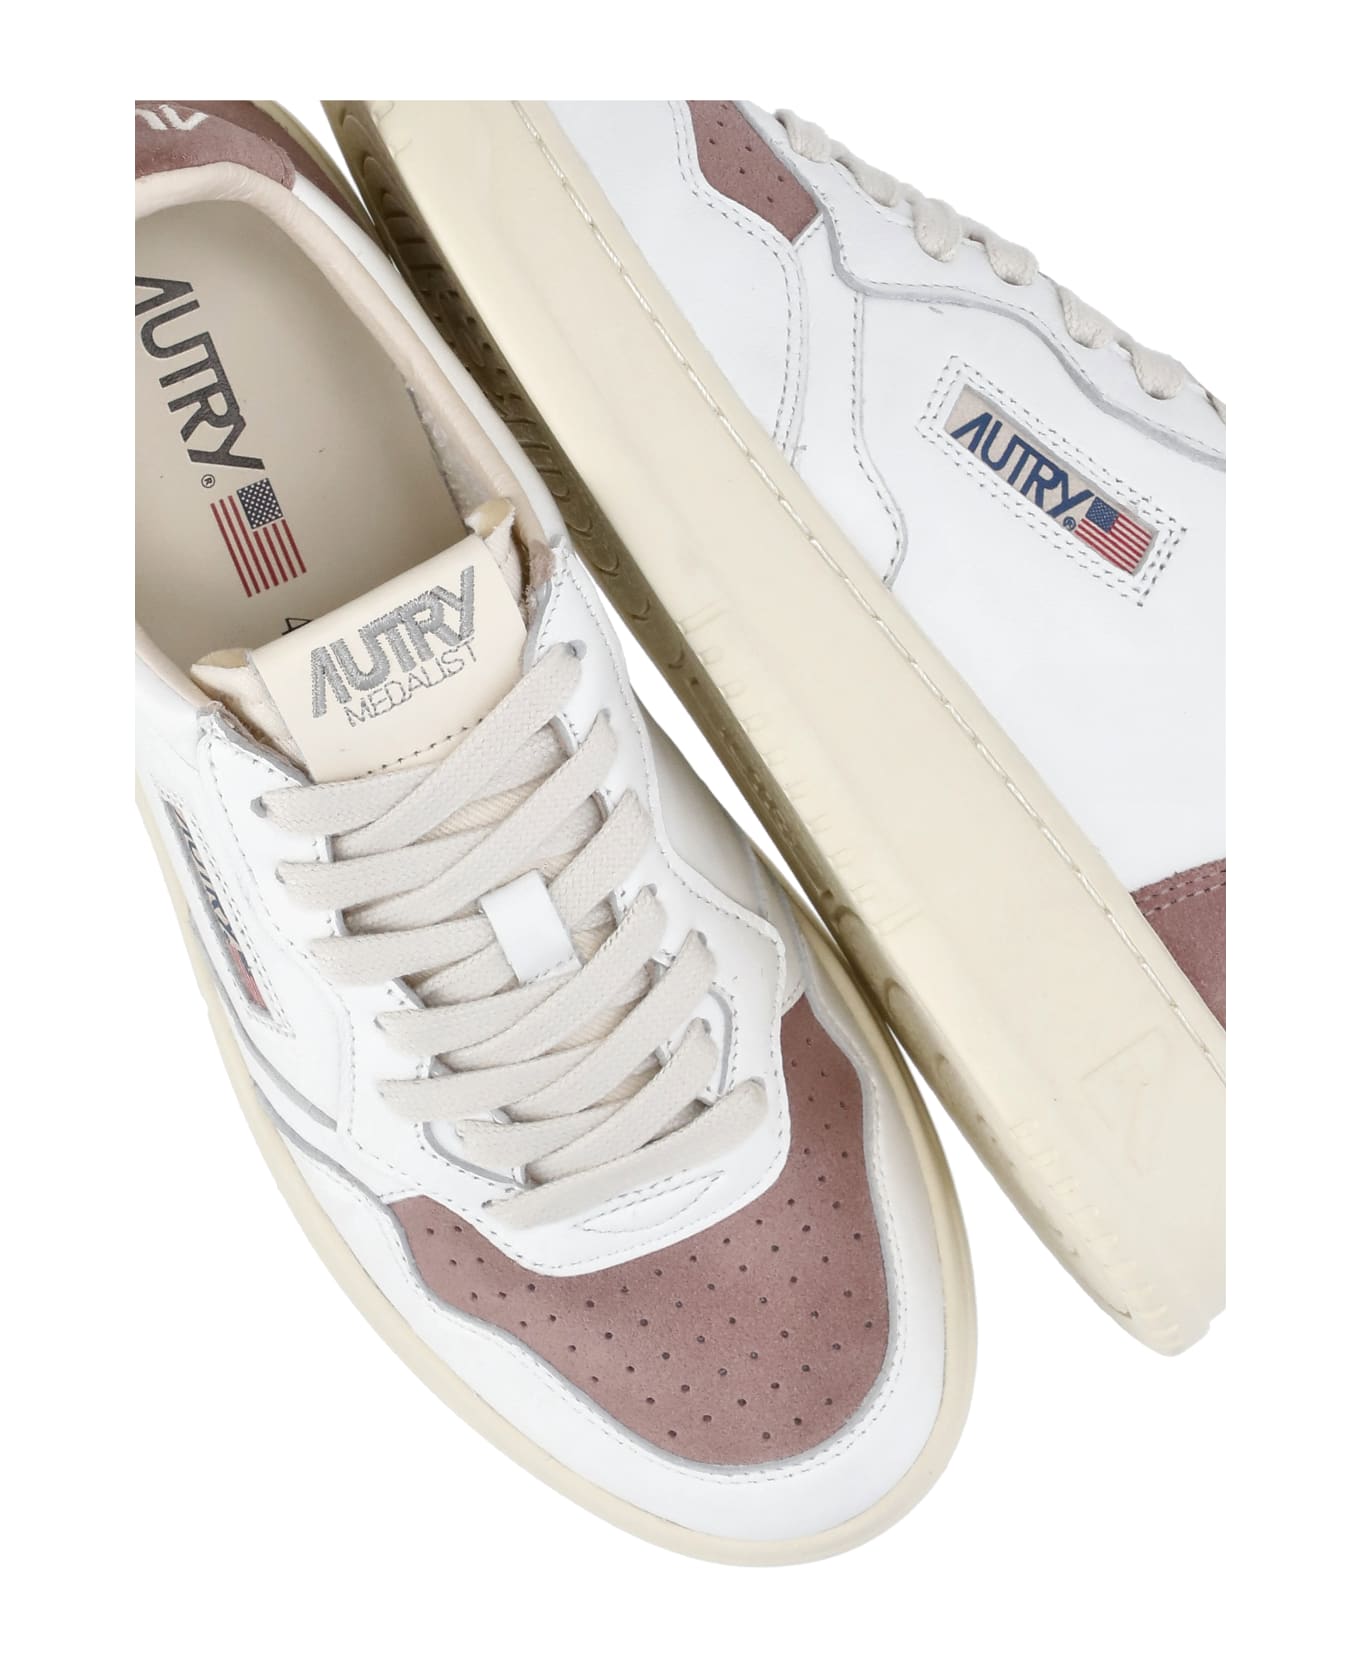 Autry Medialist Low Sneakers - White スニーカー